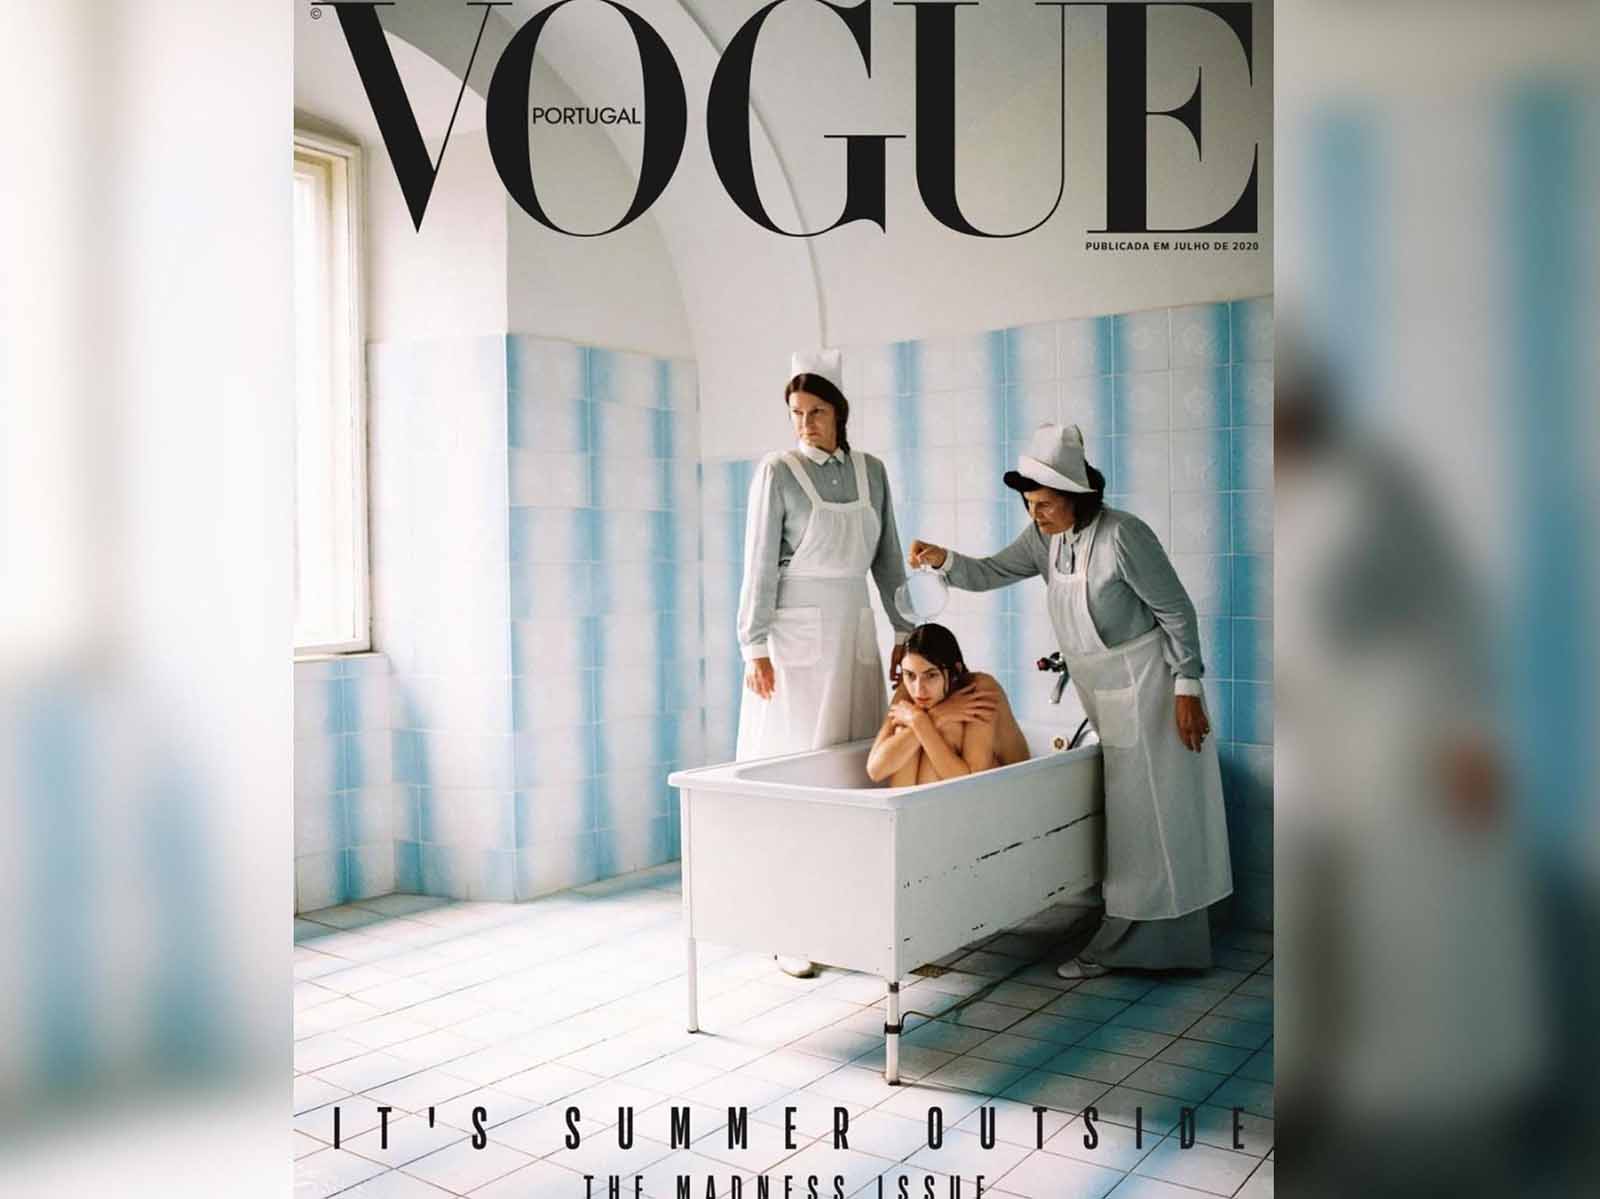 Simone Biles S Vogue Cover Proves The Mag S Way Past Its Sell By Date Film Daily